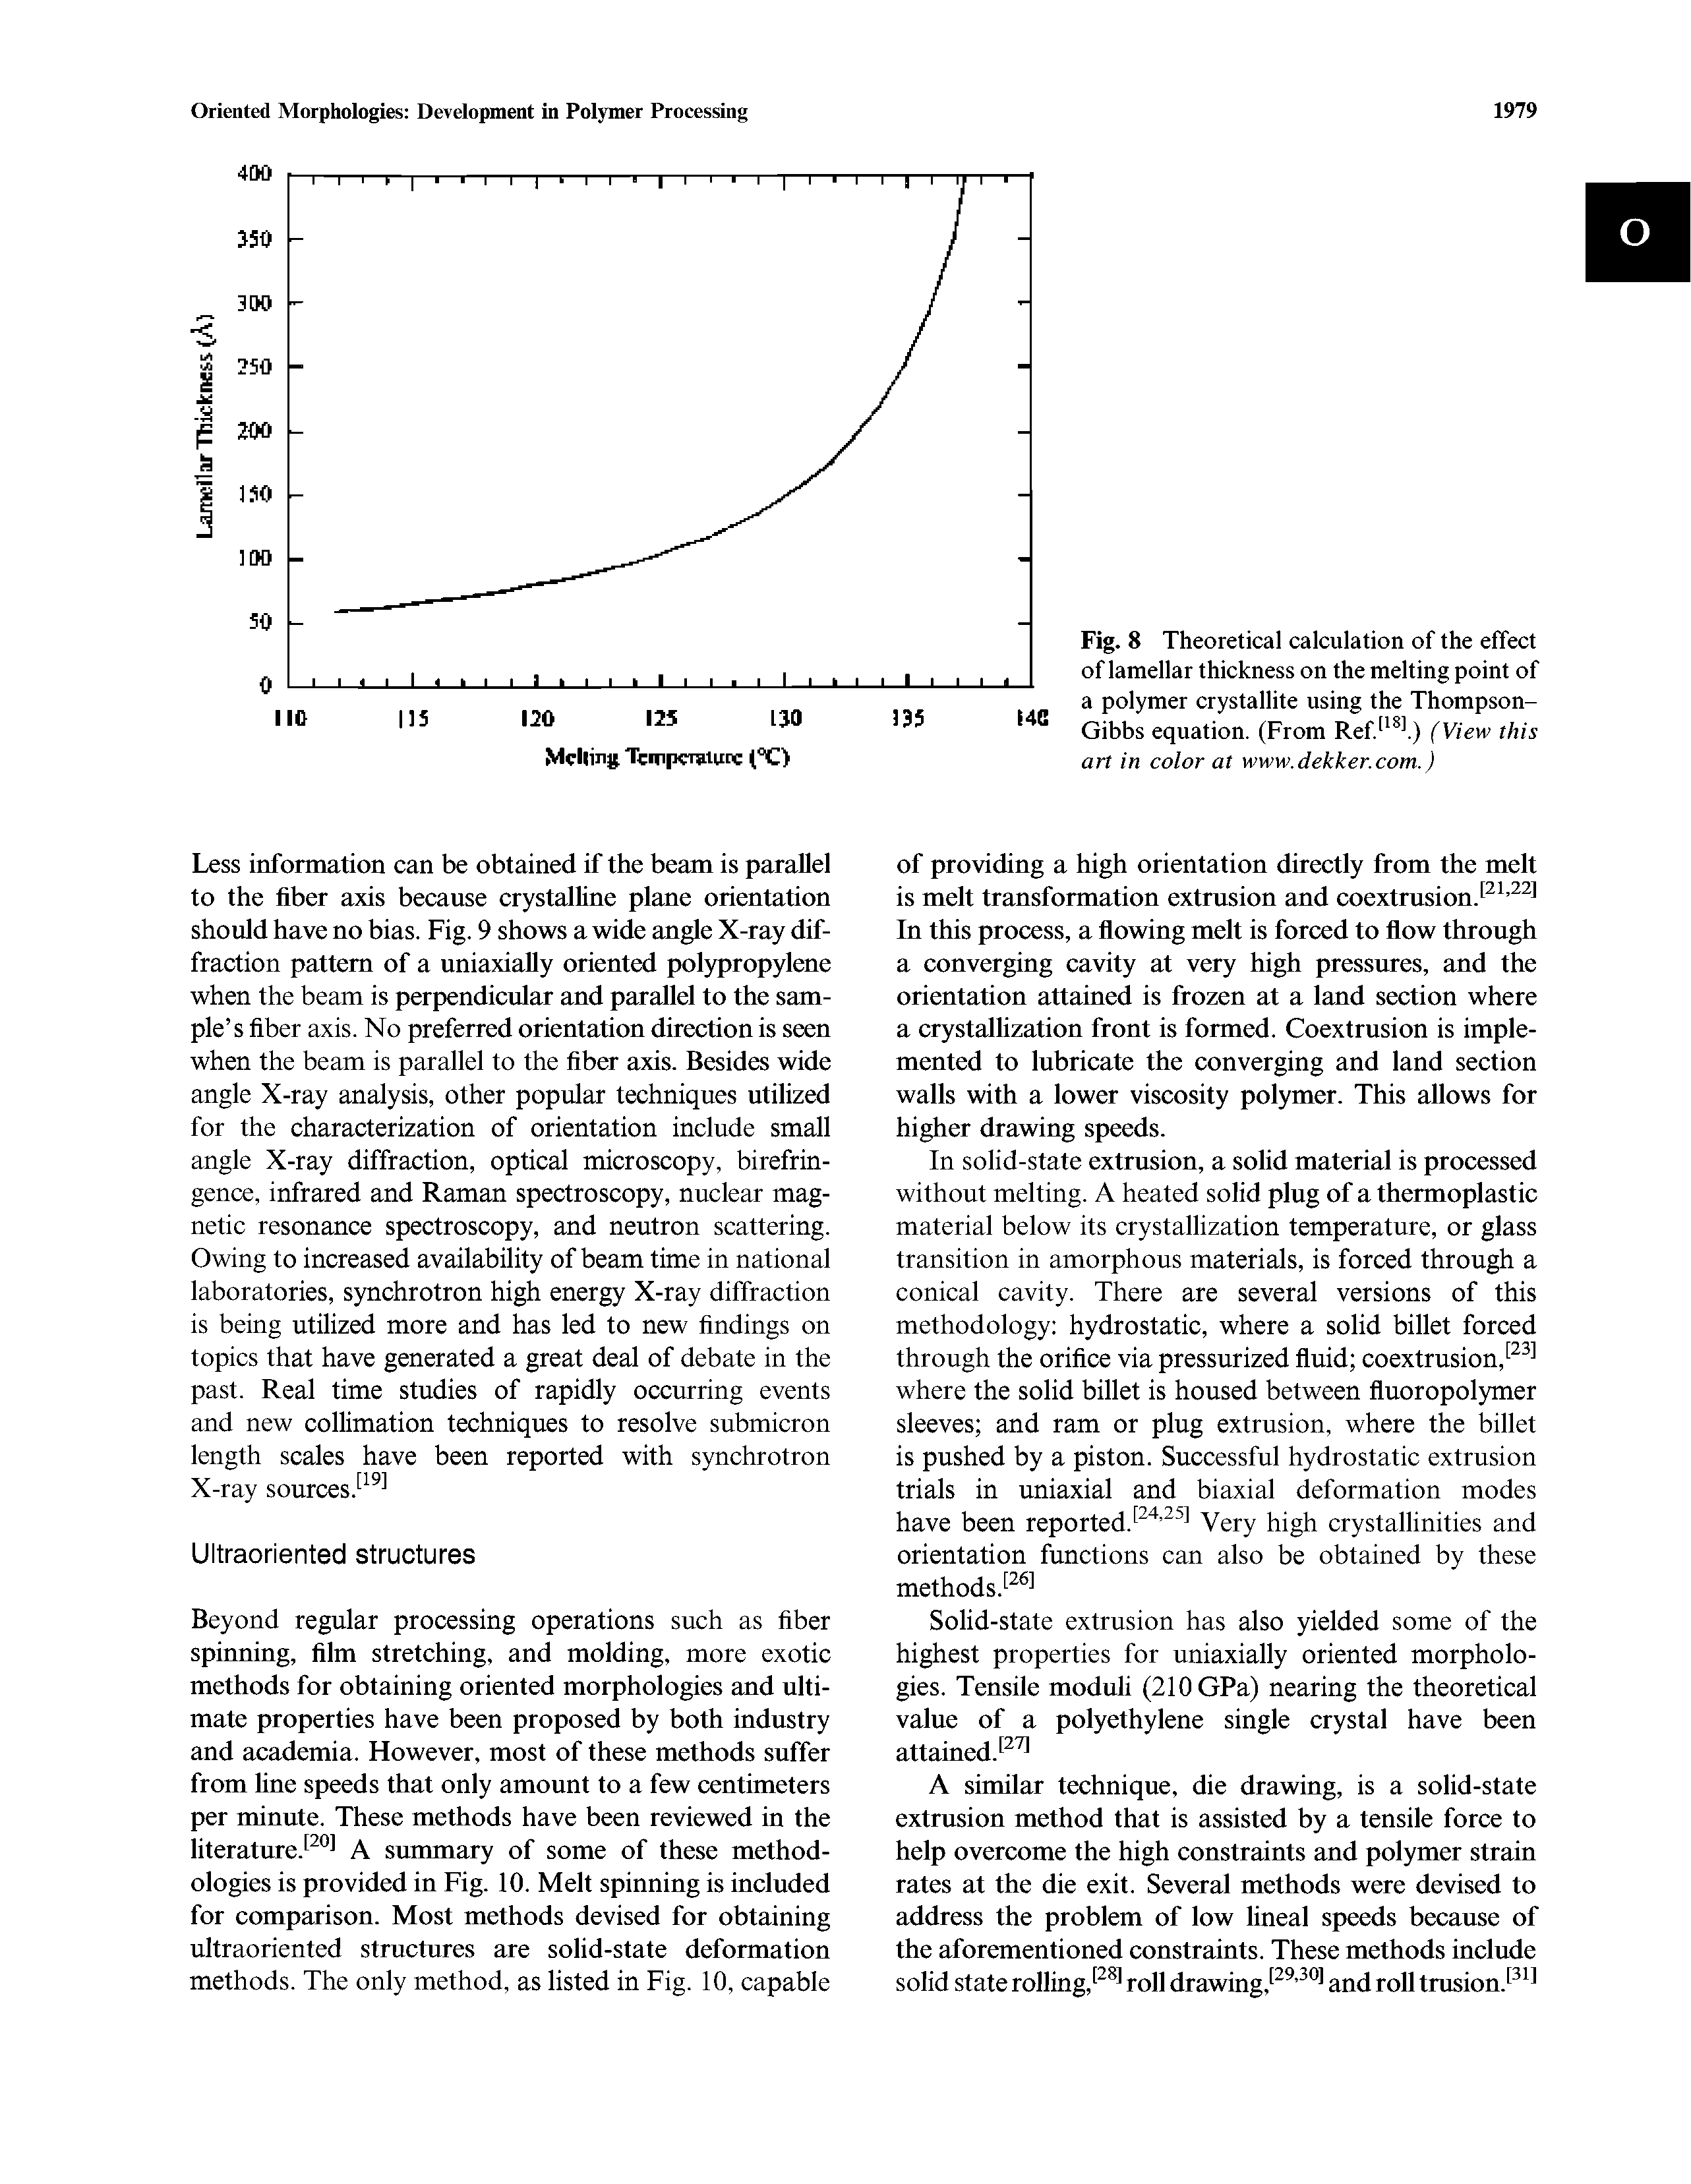 Fig. 8 Theoretical calculation of the effect of lamellar thickness on the melting point of a polymer crystallite using the Thompson-Gibbs equation. (From Ref 1) (View this art in color at www.dekker.com.)...